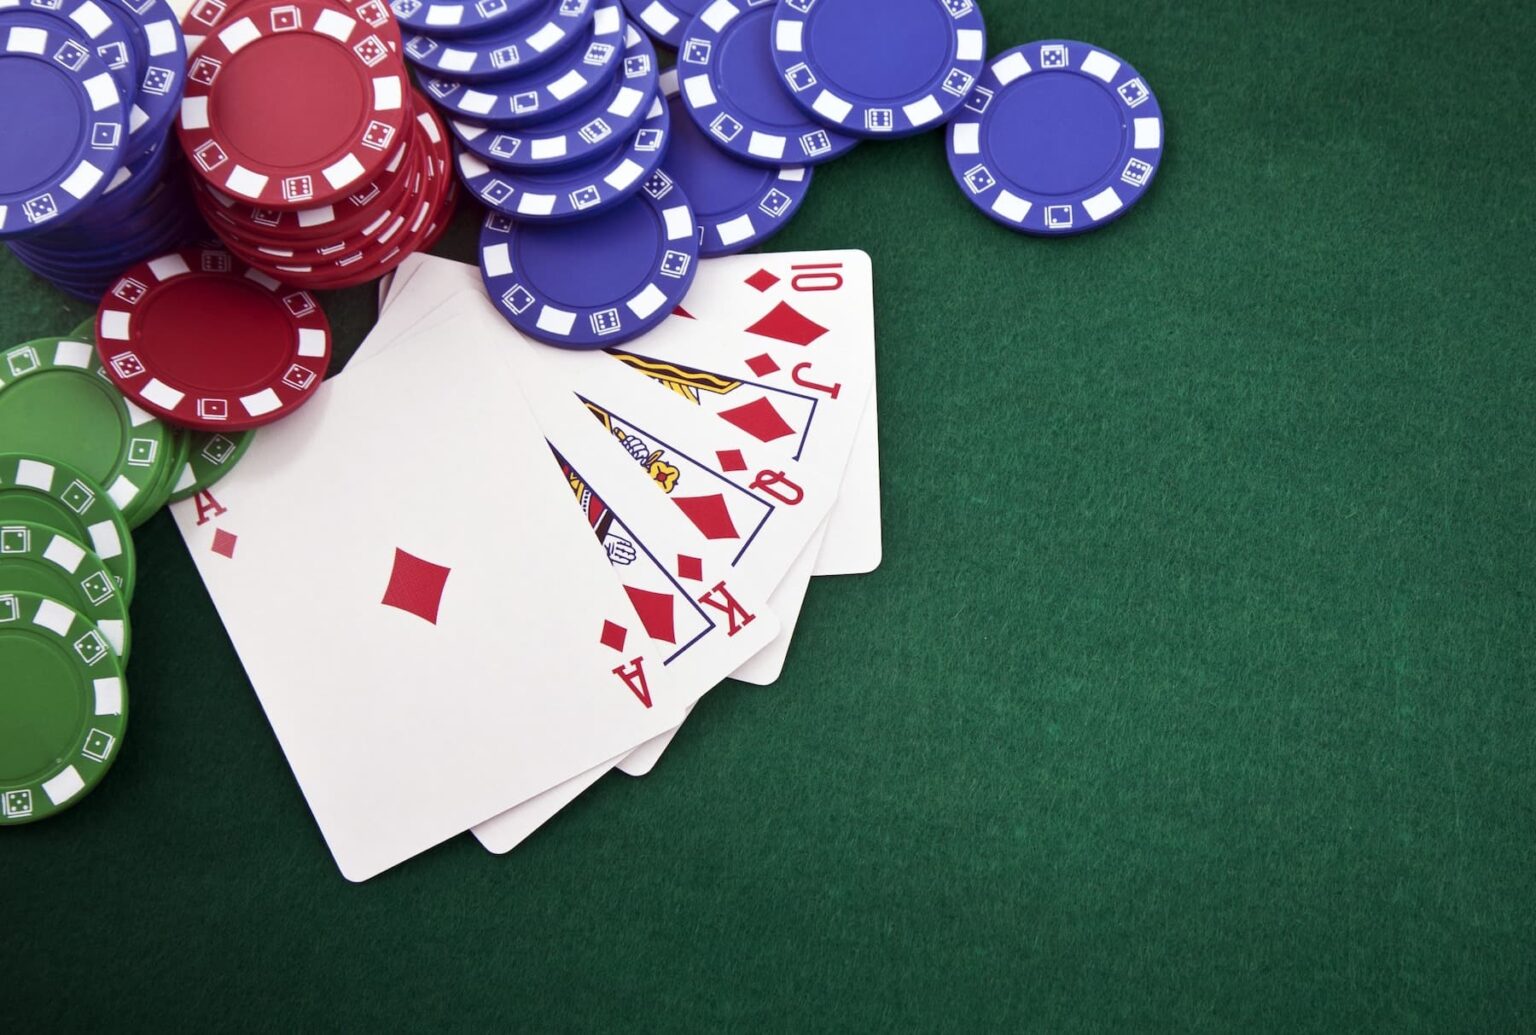 Poker is one of the most popular games played anywhere in the world. Check out what celebrities can be found taking seats at poker tables online and offline.